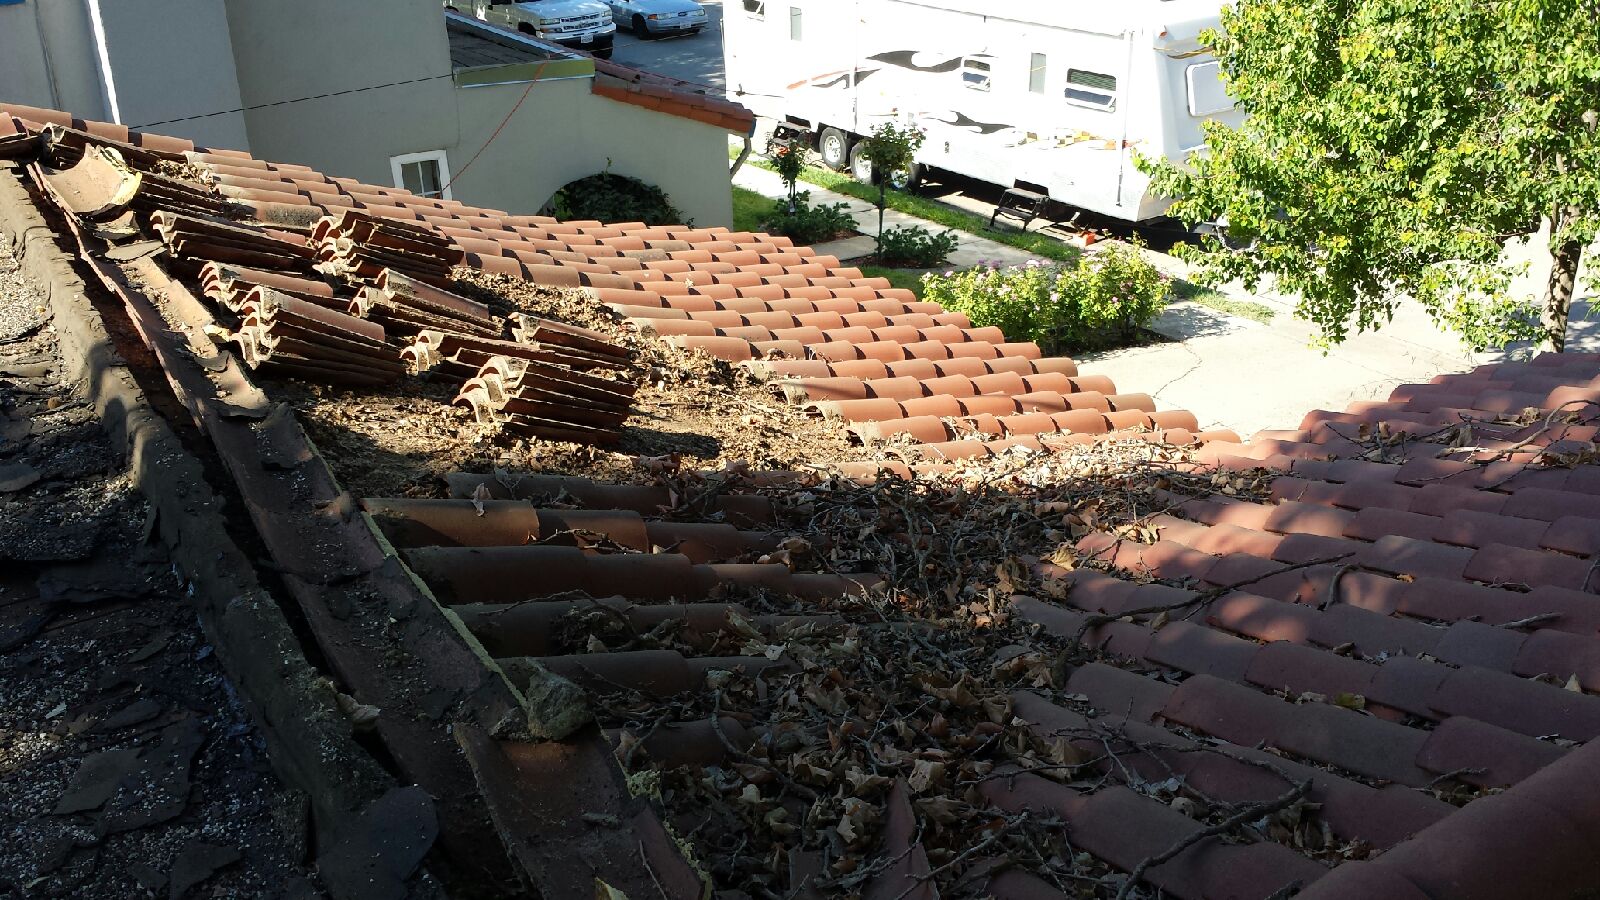 Roof tear off project by Ved's Roofing of Yuba City, CA.